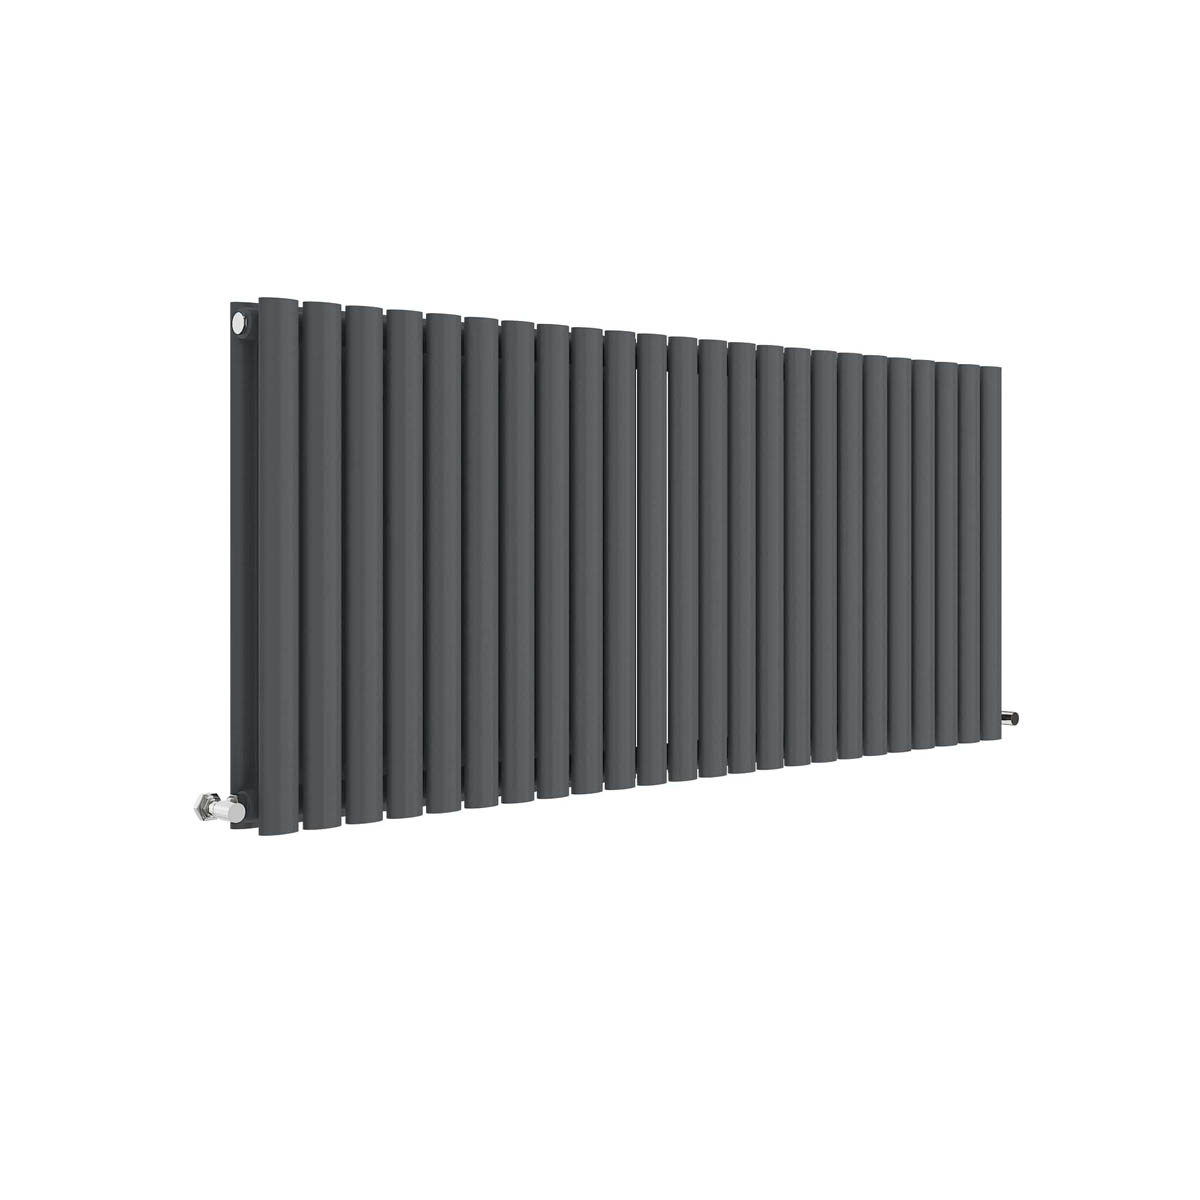 Hudson Reed Revive Horizontal Double Panel Radiator 600 x 1398mm - Anthracite (18651)